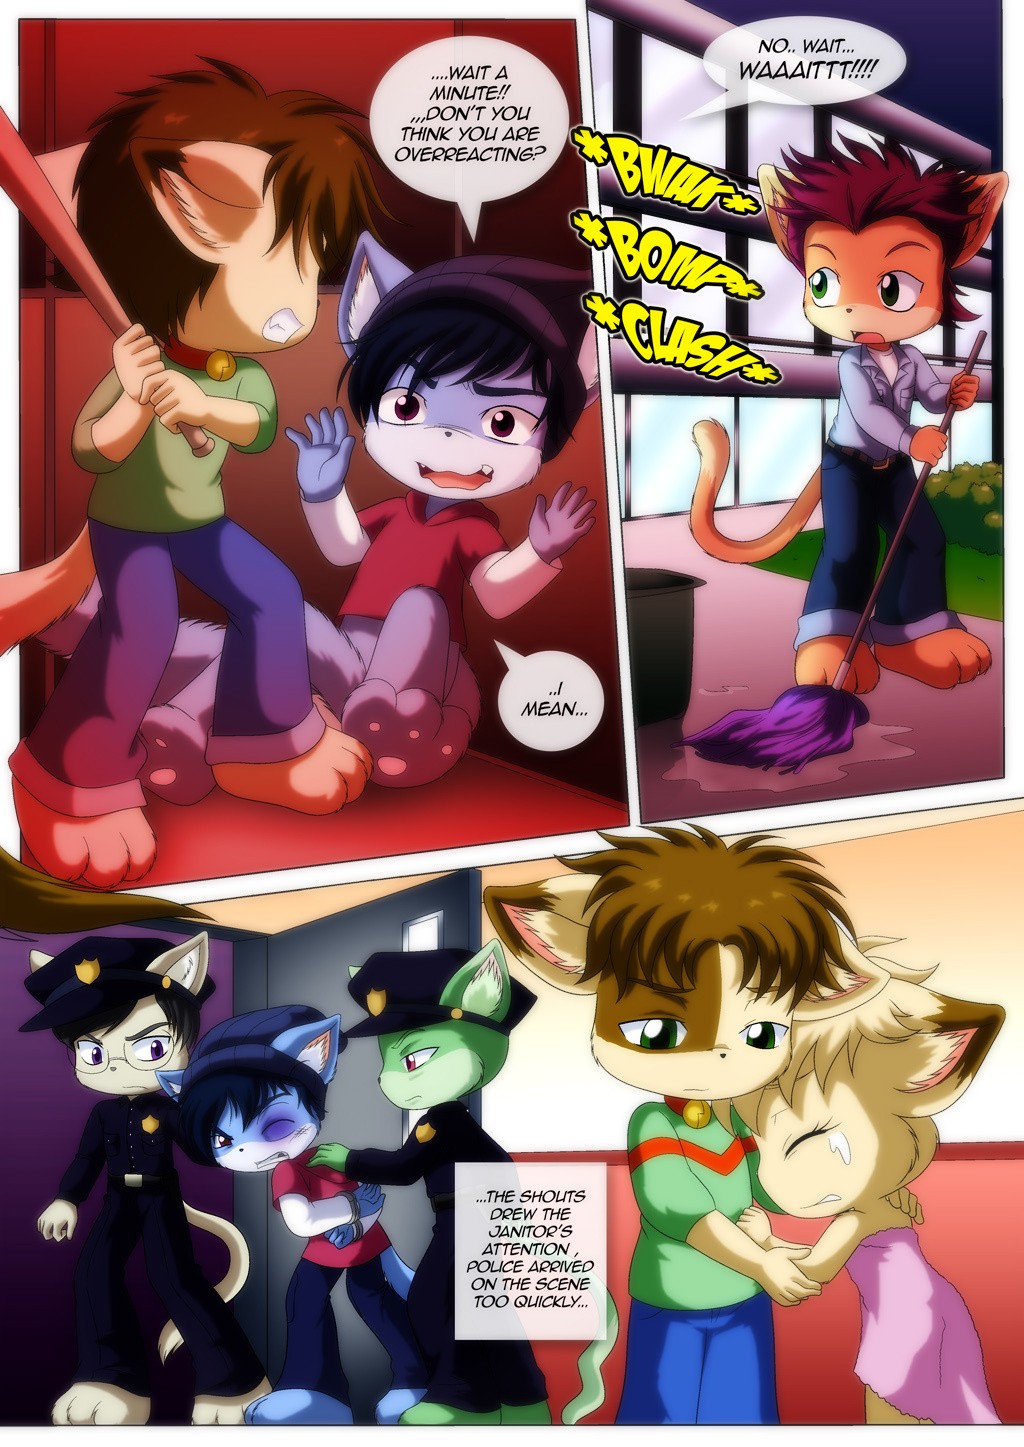 Little Tails 6: Missing The Light of The Day porn comic picture 31